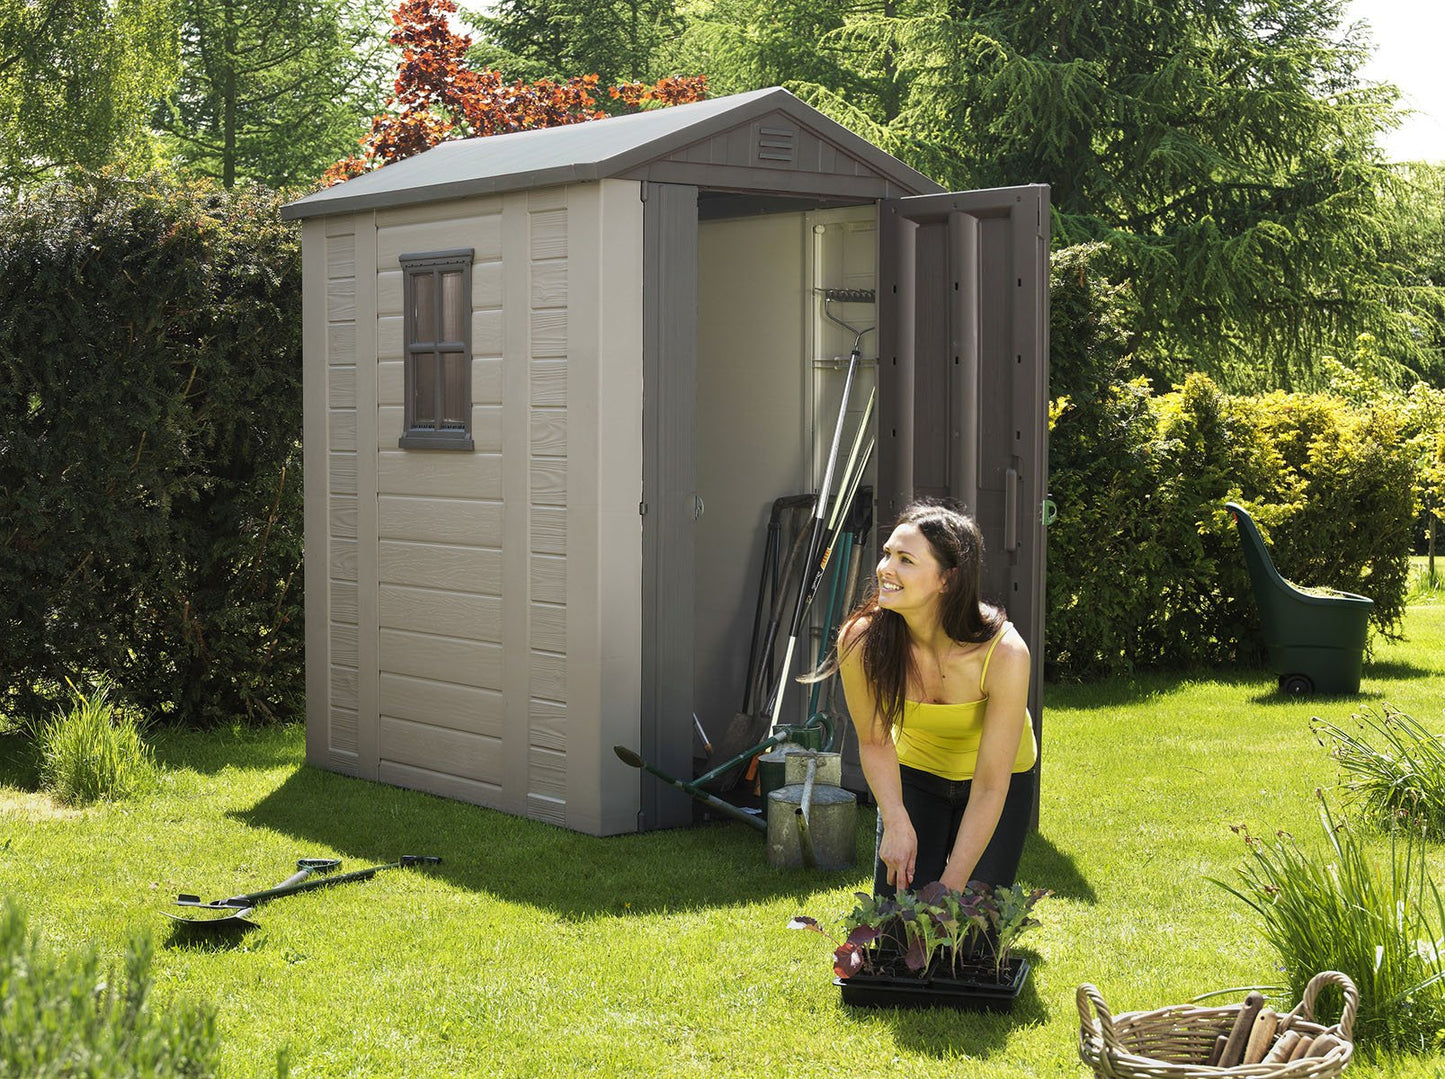 Keter Factor 4x6 Outdoor Storage Shed Kit-Perfect to Store Patio Furniture, Garden Tools, Bike Accessories, Beach Chairs and Push Lawn Mower